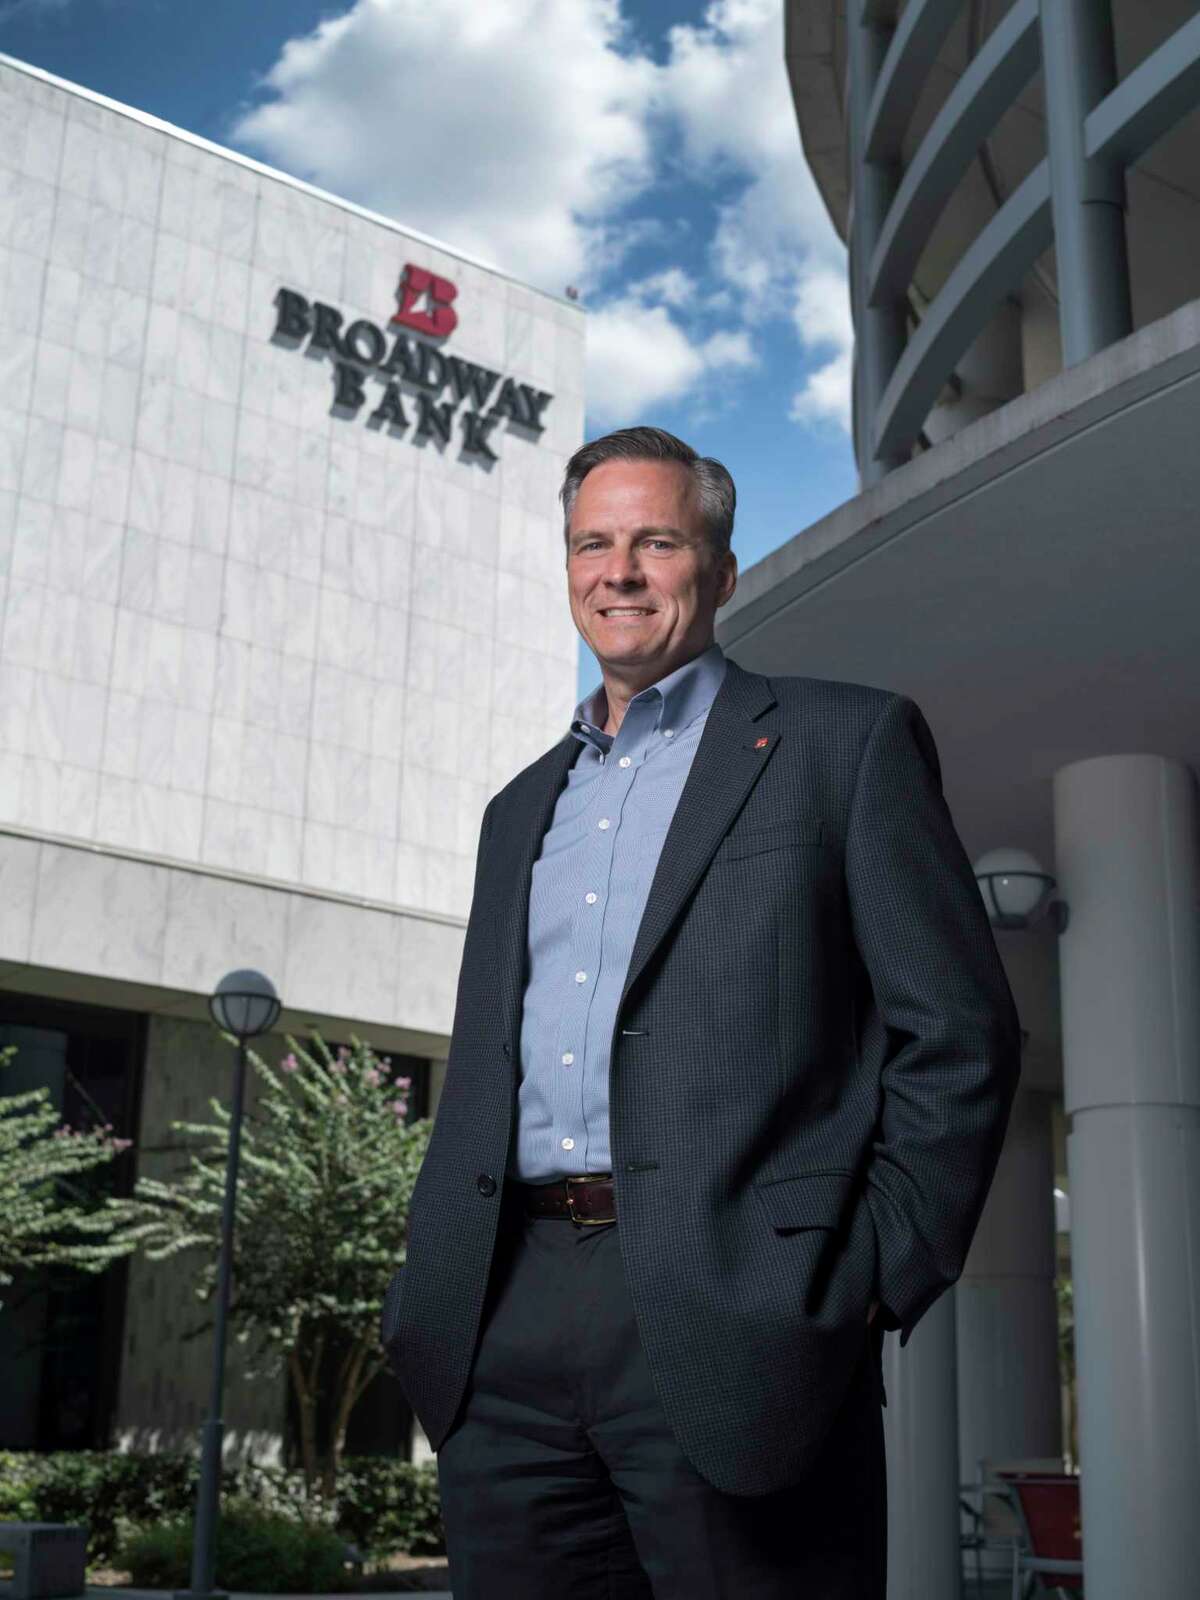 Broadway Bank CEO and President David Bohne said on the bank’s website that in response to COVID-19 it’s implementing special arrangements on business and commercial loans, payment deferrals on auto and installment loans and waiving fees on liquidations of certificate of deposits.